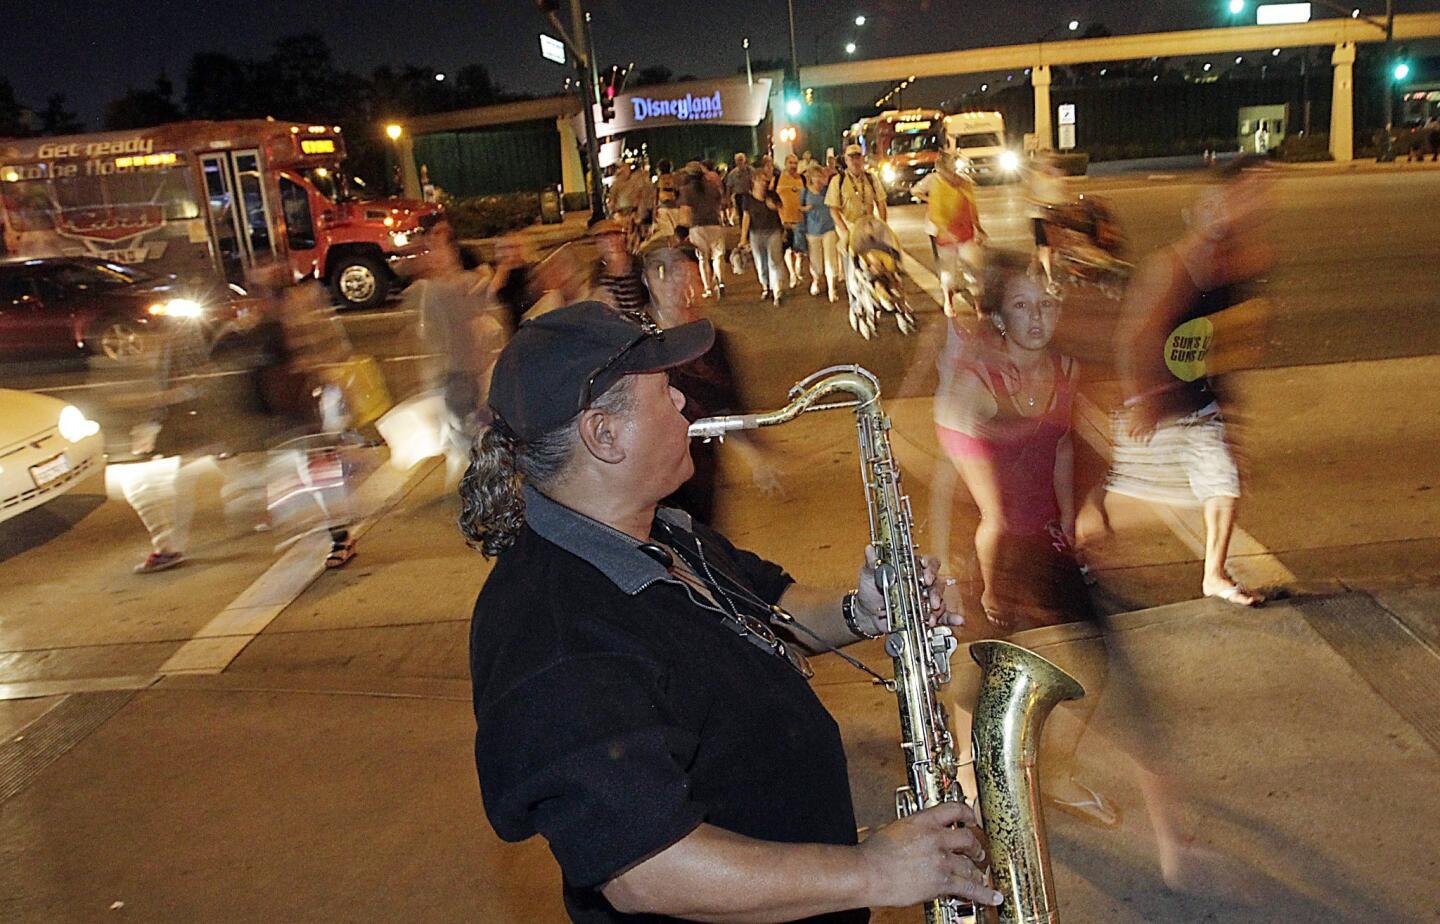 Mike the saxophone player gives a performance near Disneyland along Harbor Boulevard. Though the theme park has grown even more closed off from Anaheim over the years, its architecture has managed to seep out along the boulevard, where kitschy motels, lush landscaping and the monorail trumpet Disneyland's dominance.